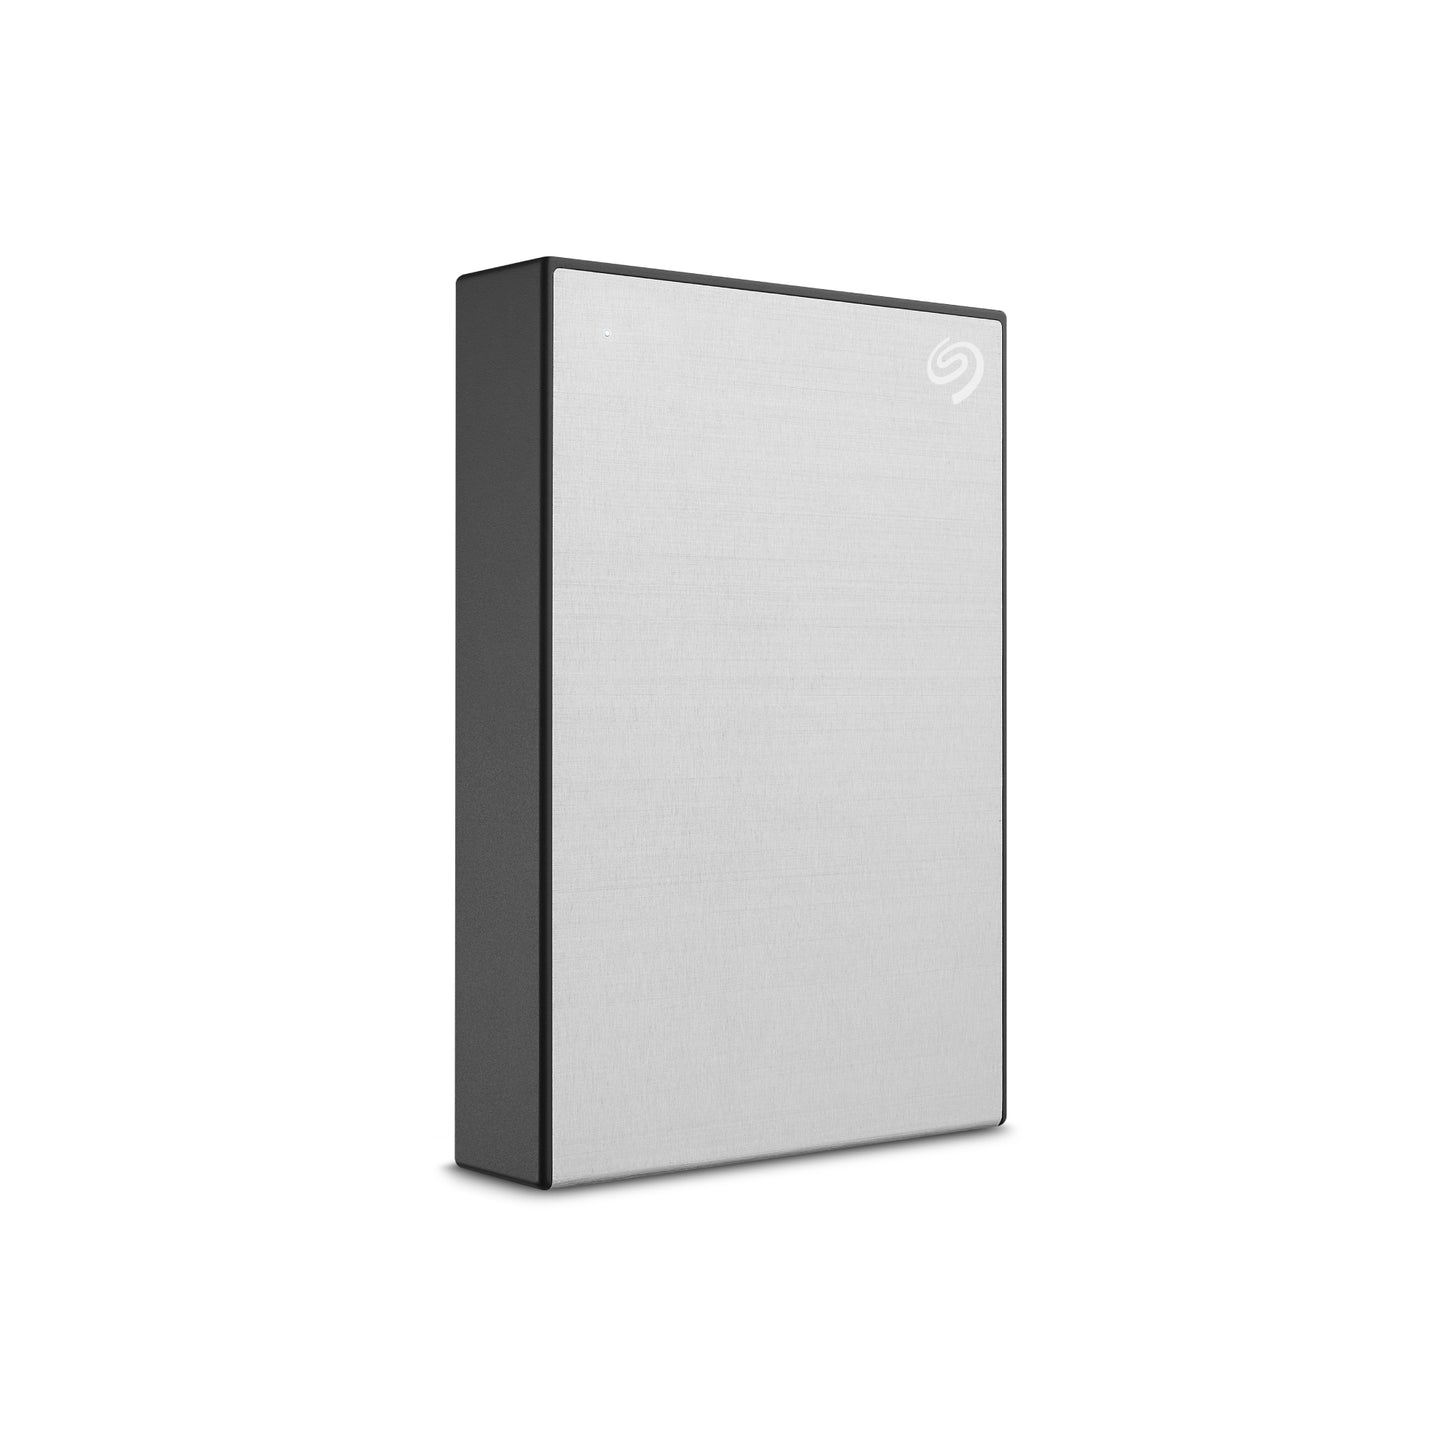 SEAGATE One Touch Slim USB 3.0 1TB - Space Grey